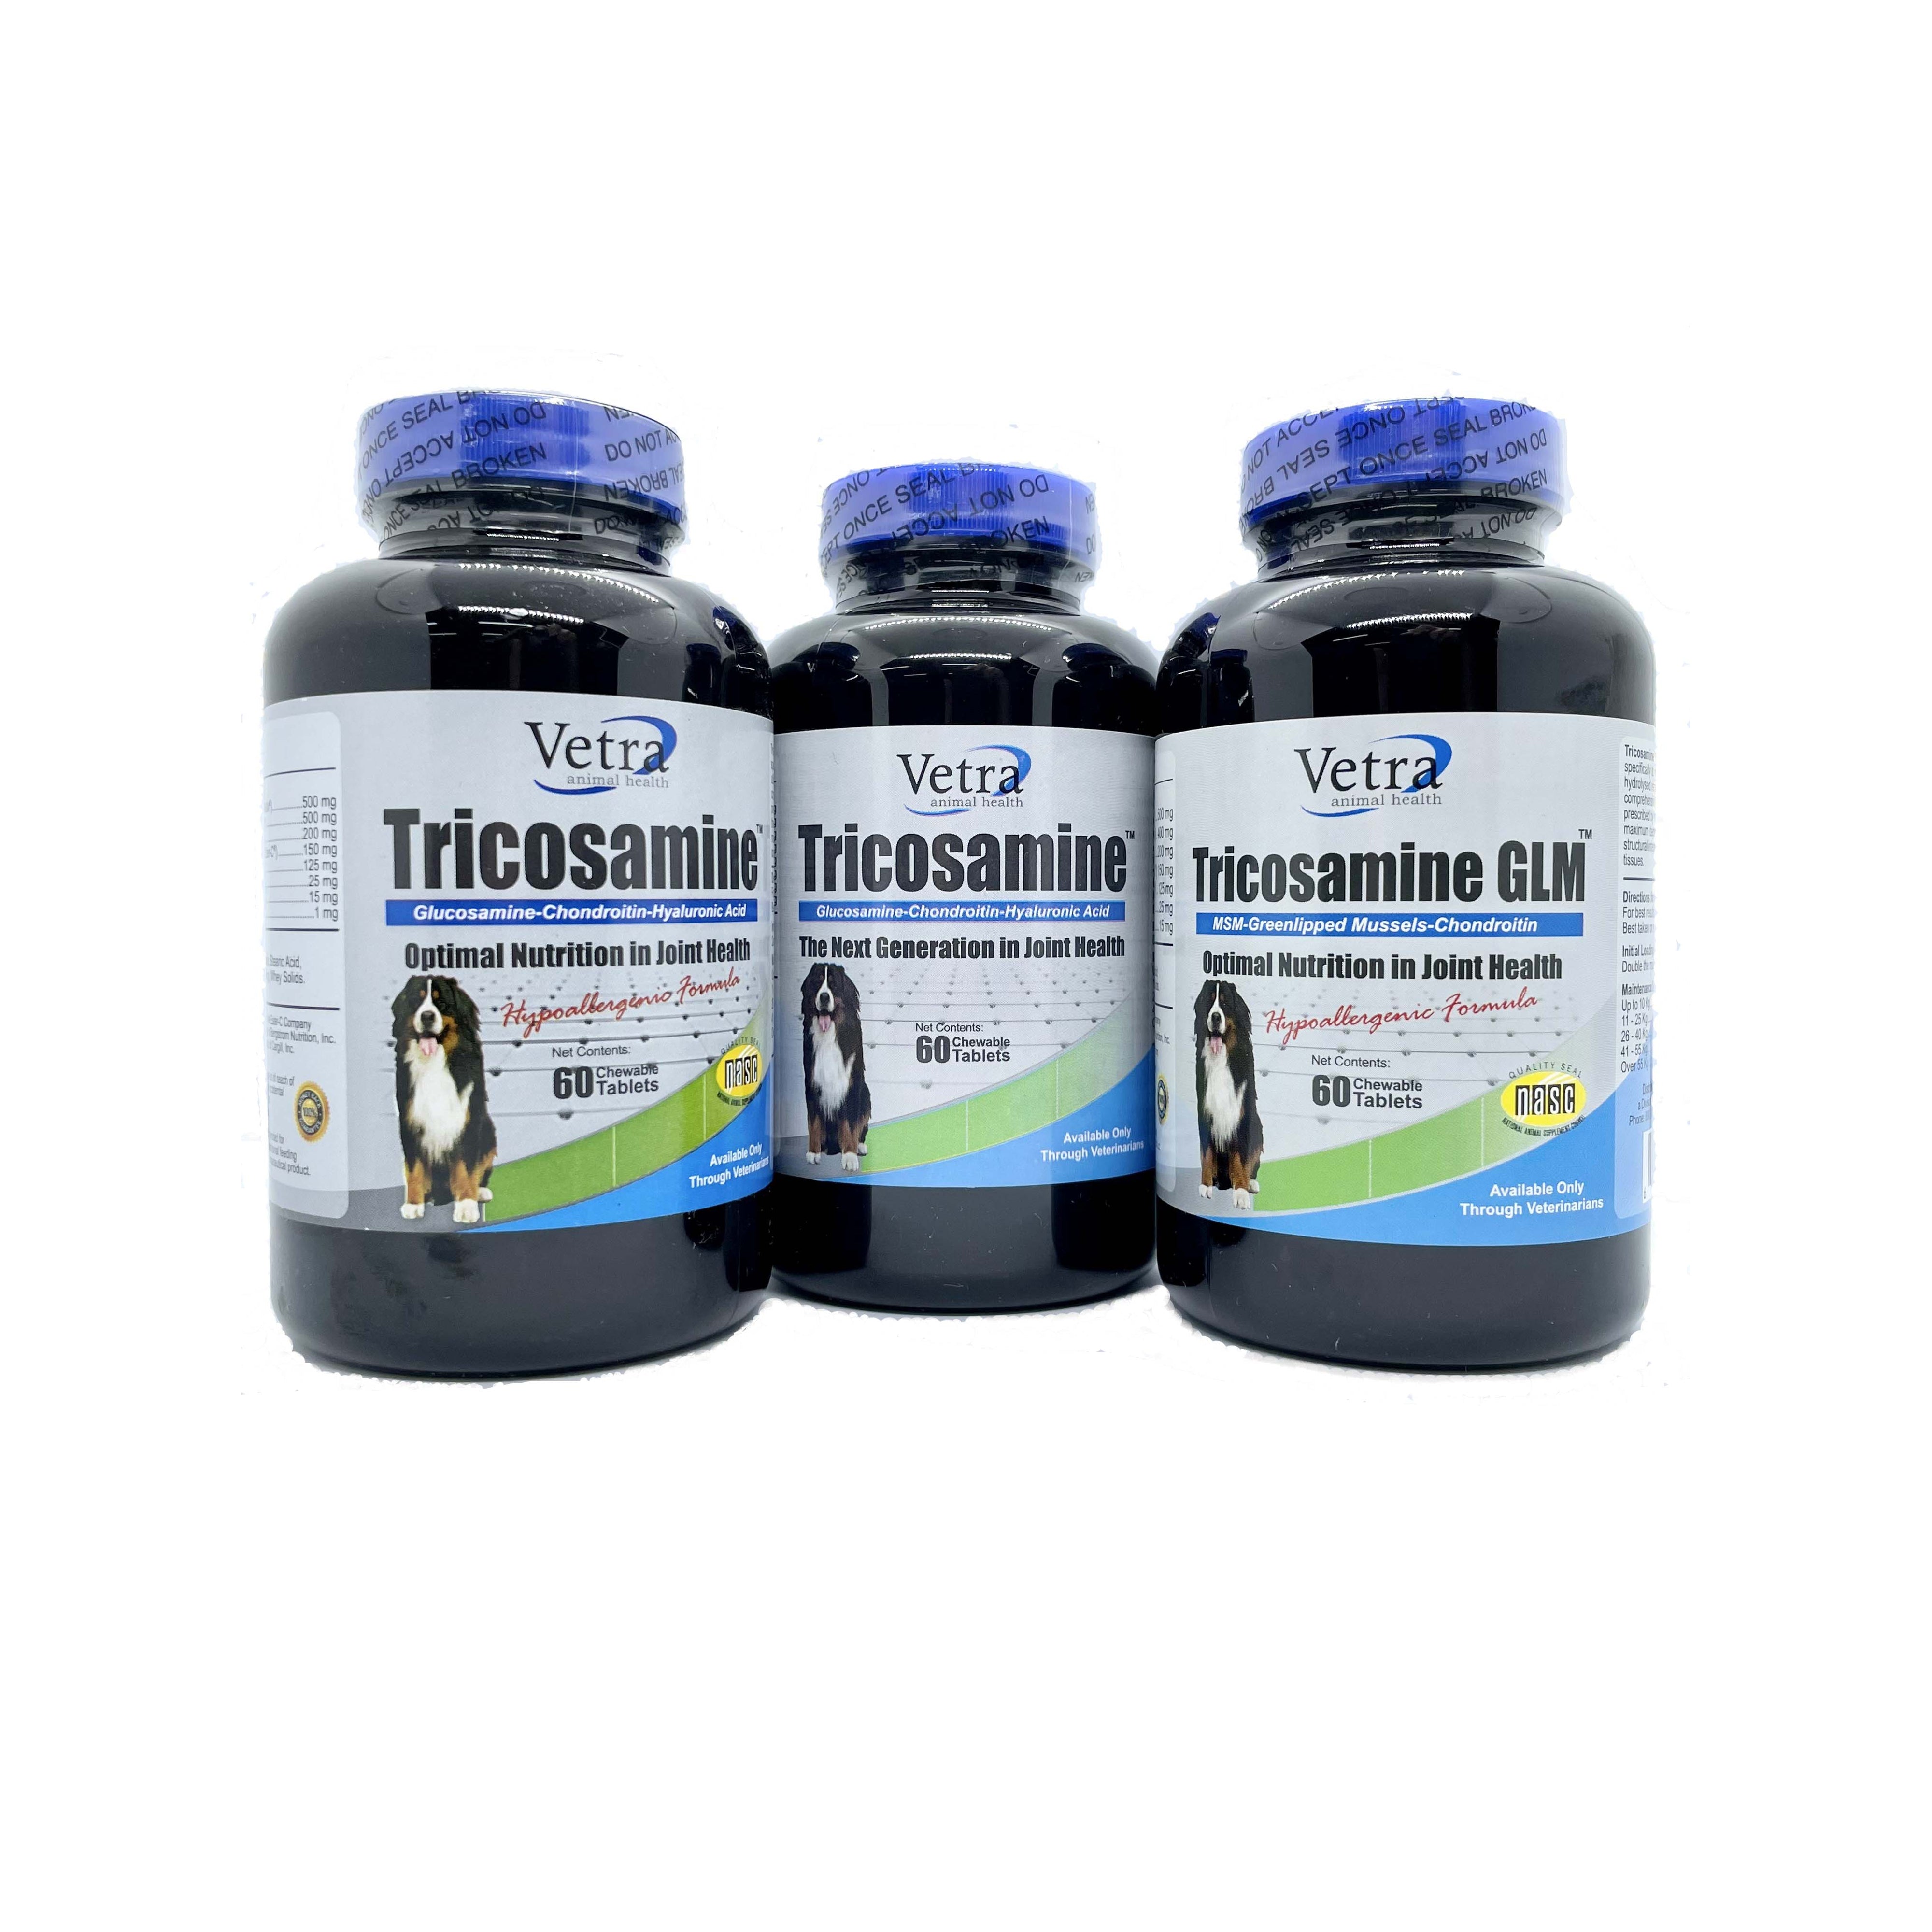 Vetra Animal Health Tricosamine GLM (Greenlipped Mussels) Joint Supplement (Hypoallergenic)